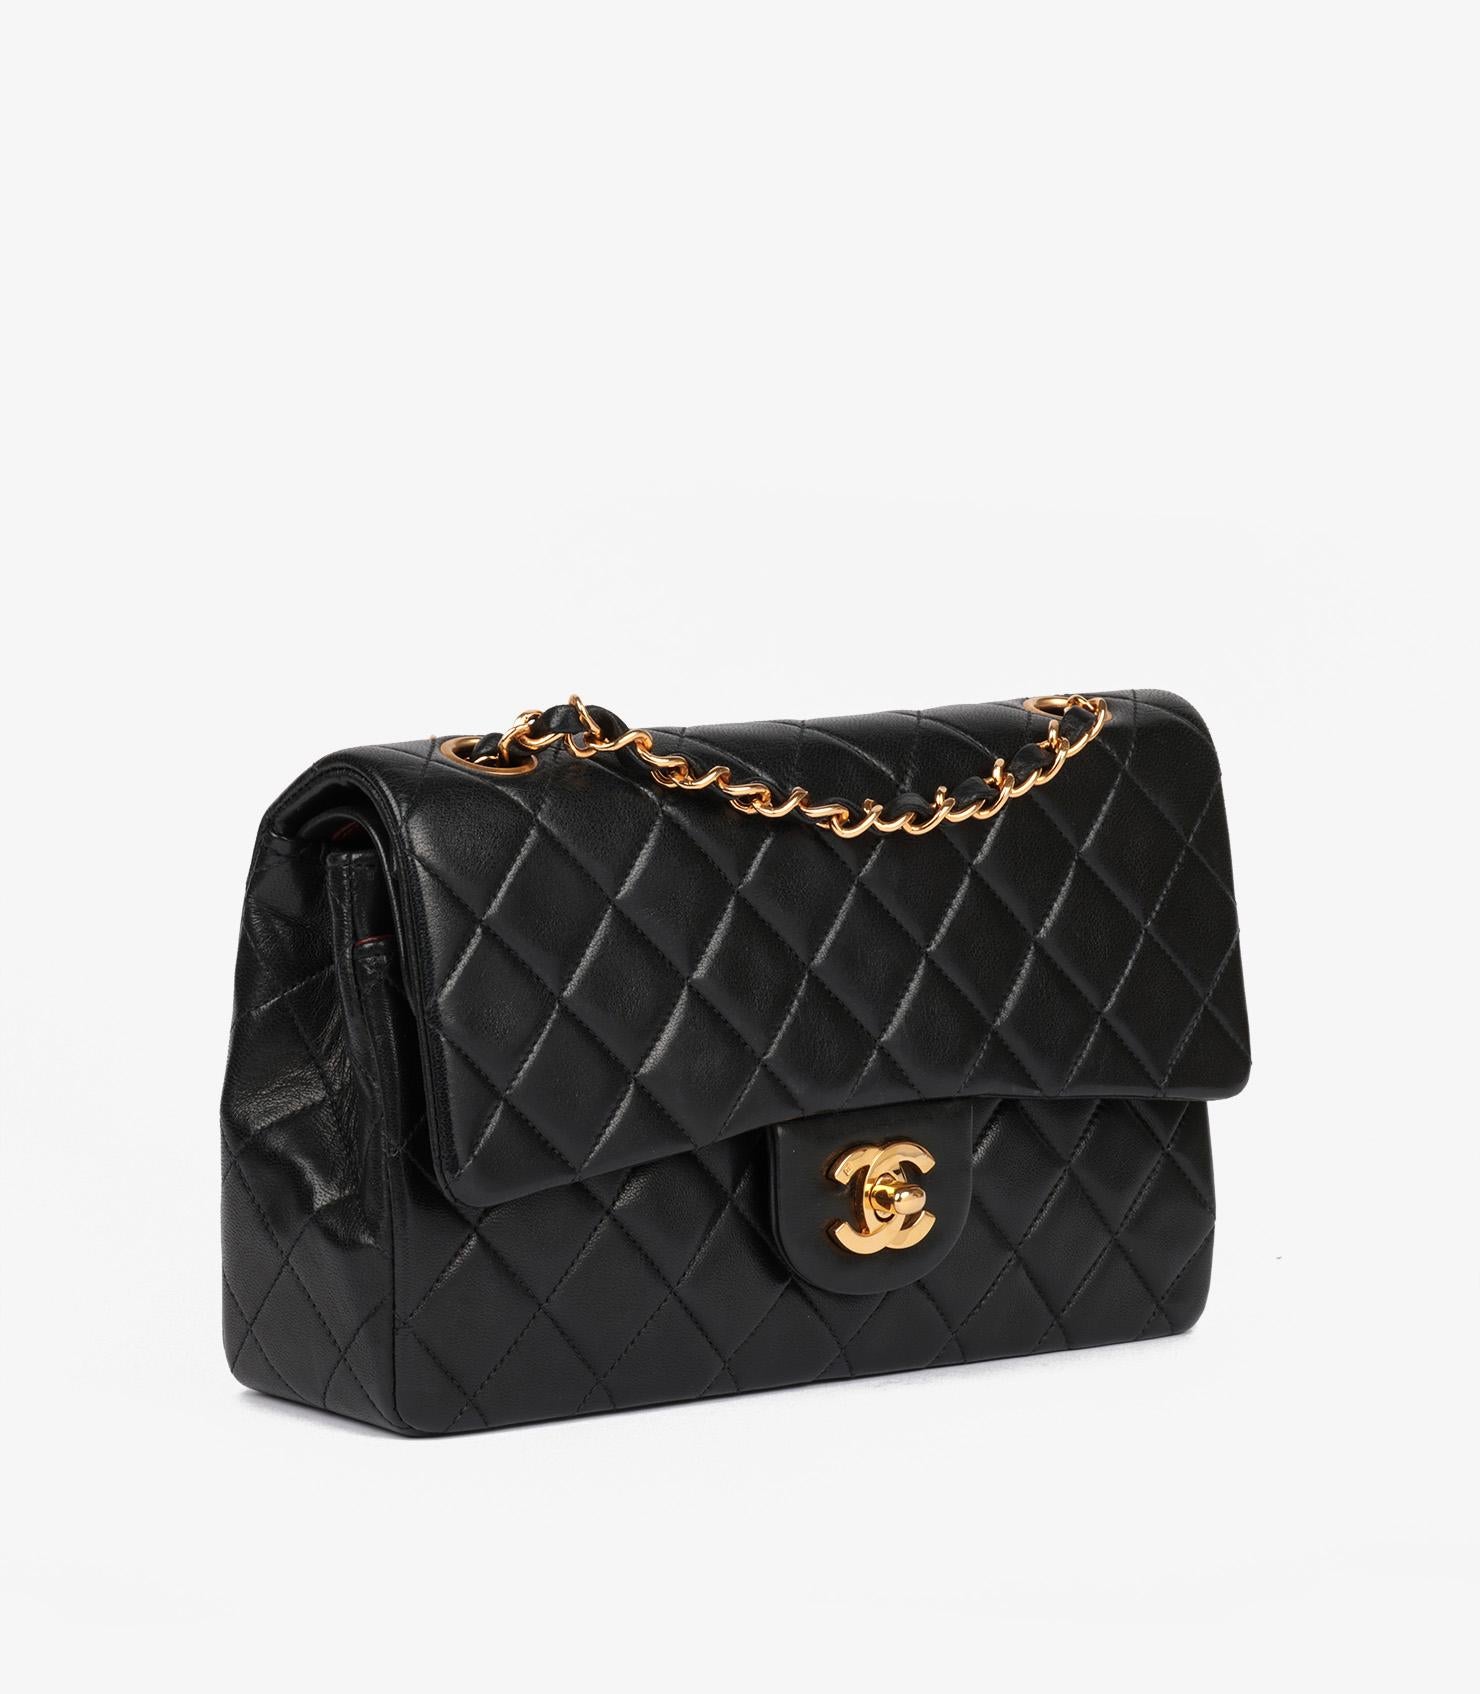 Chanel Black Quilted Lambskin Vintage Small Classic Double Flap Bag

Brand- Chanel
Model- Small Classic Double Flap Bag
Product Type- Shoulder
Serial Number- 45*****
Age- Circa 1996
Accompanied By- Chanel Dust Bag, Authenticity Card
Colour-